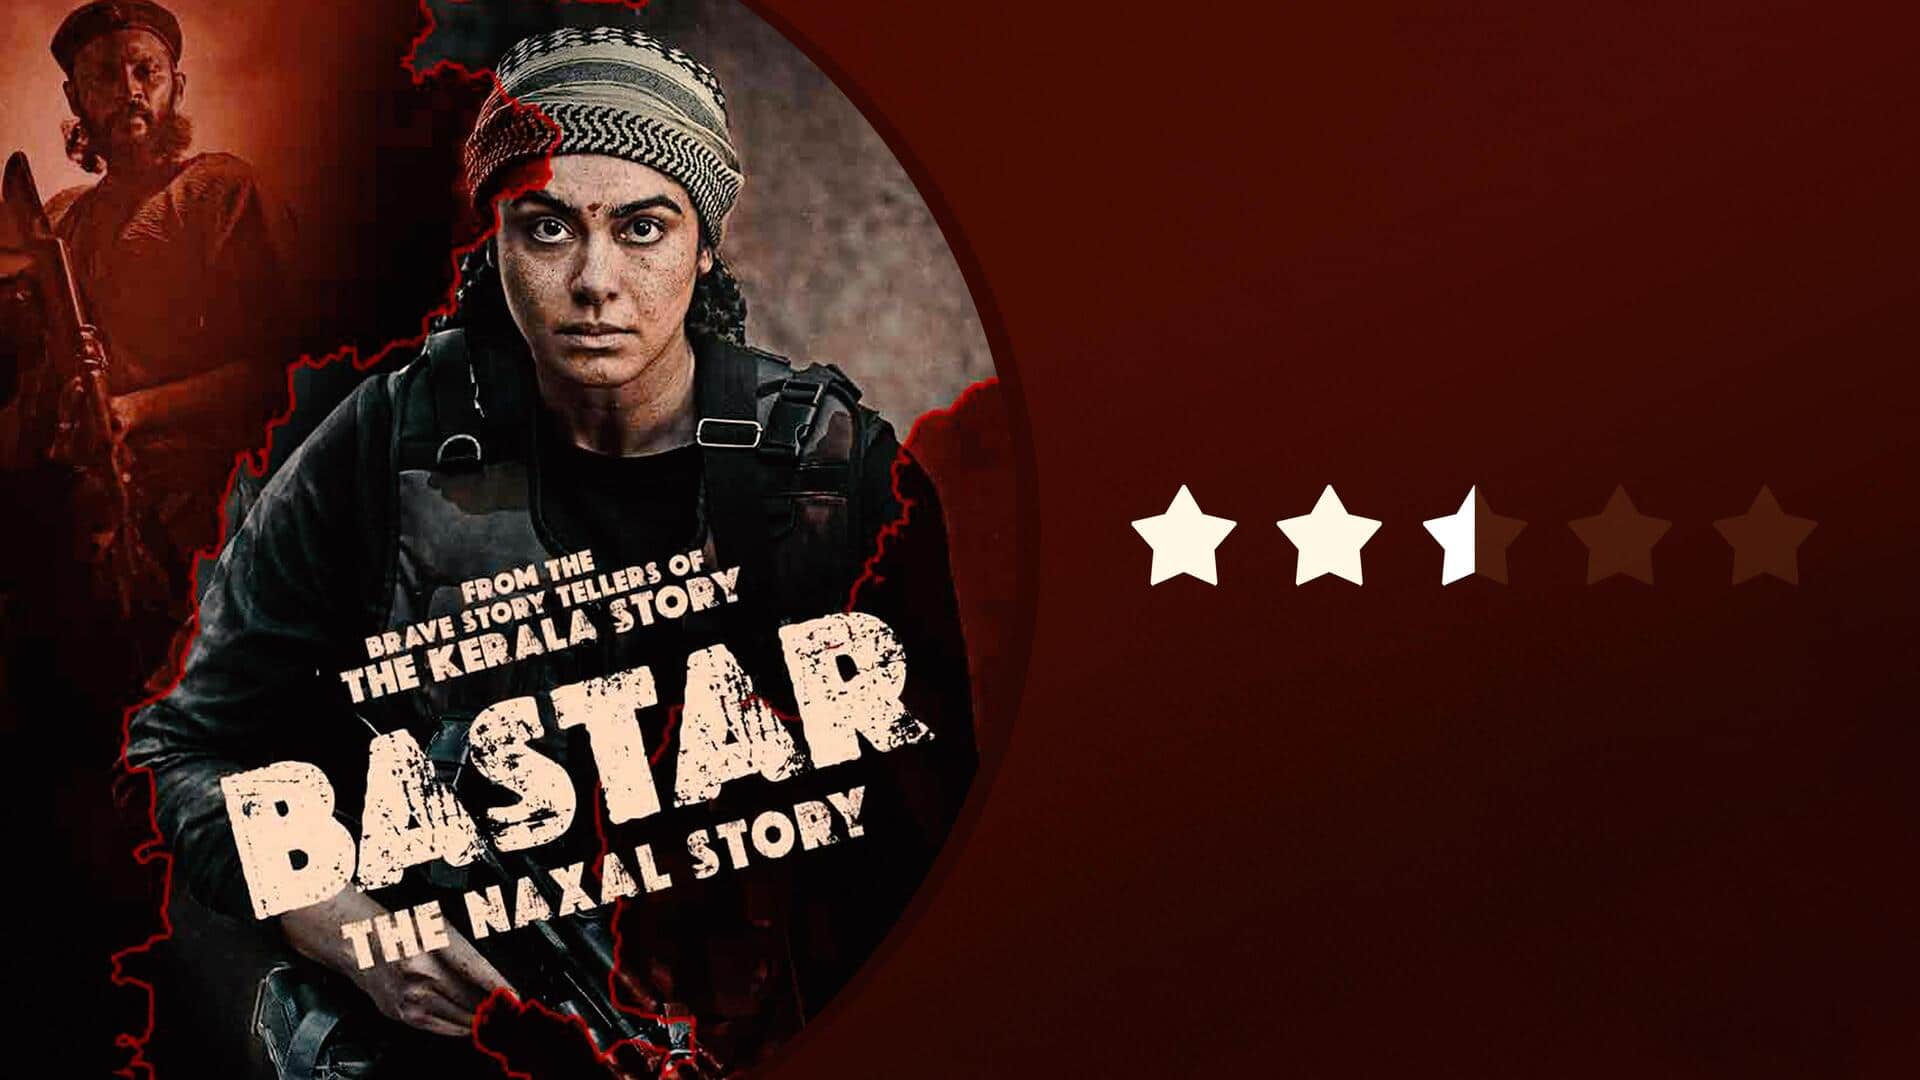 'Bastar' review: A hard-hitting reality bogged down by poor acting